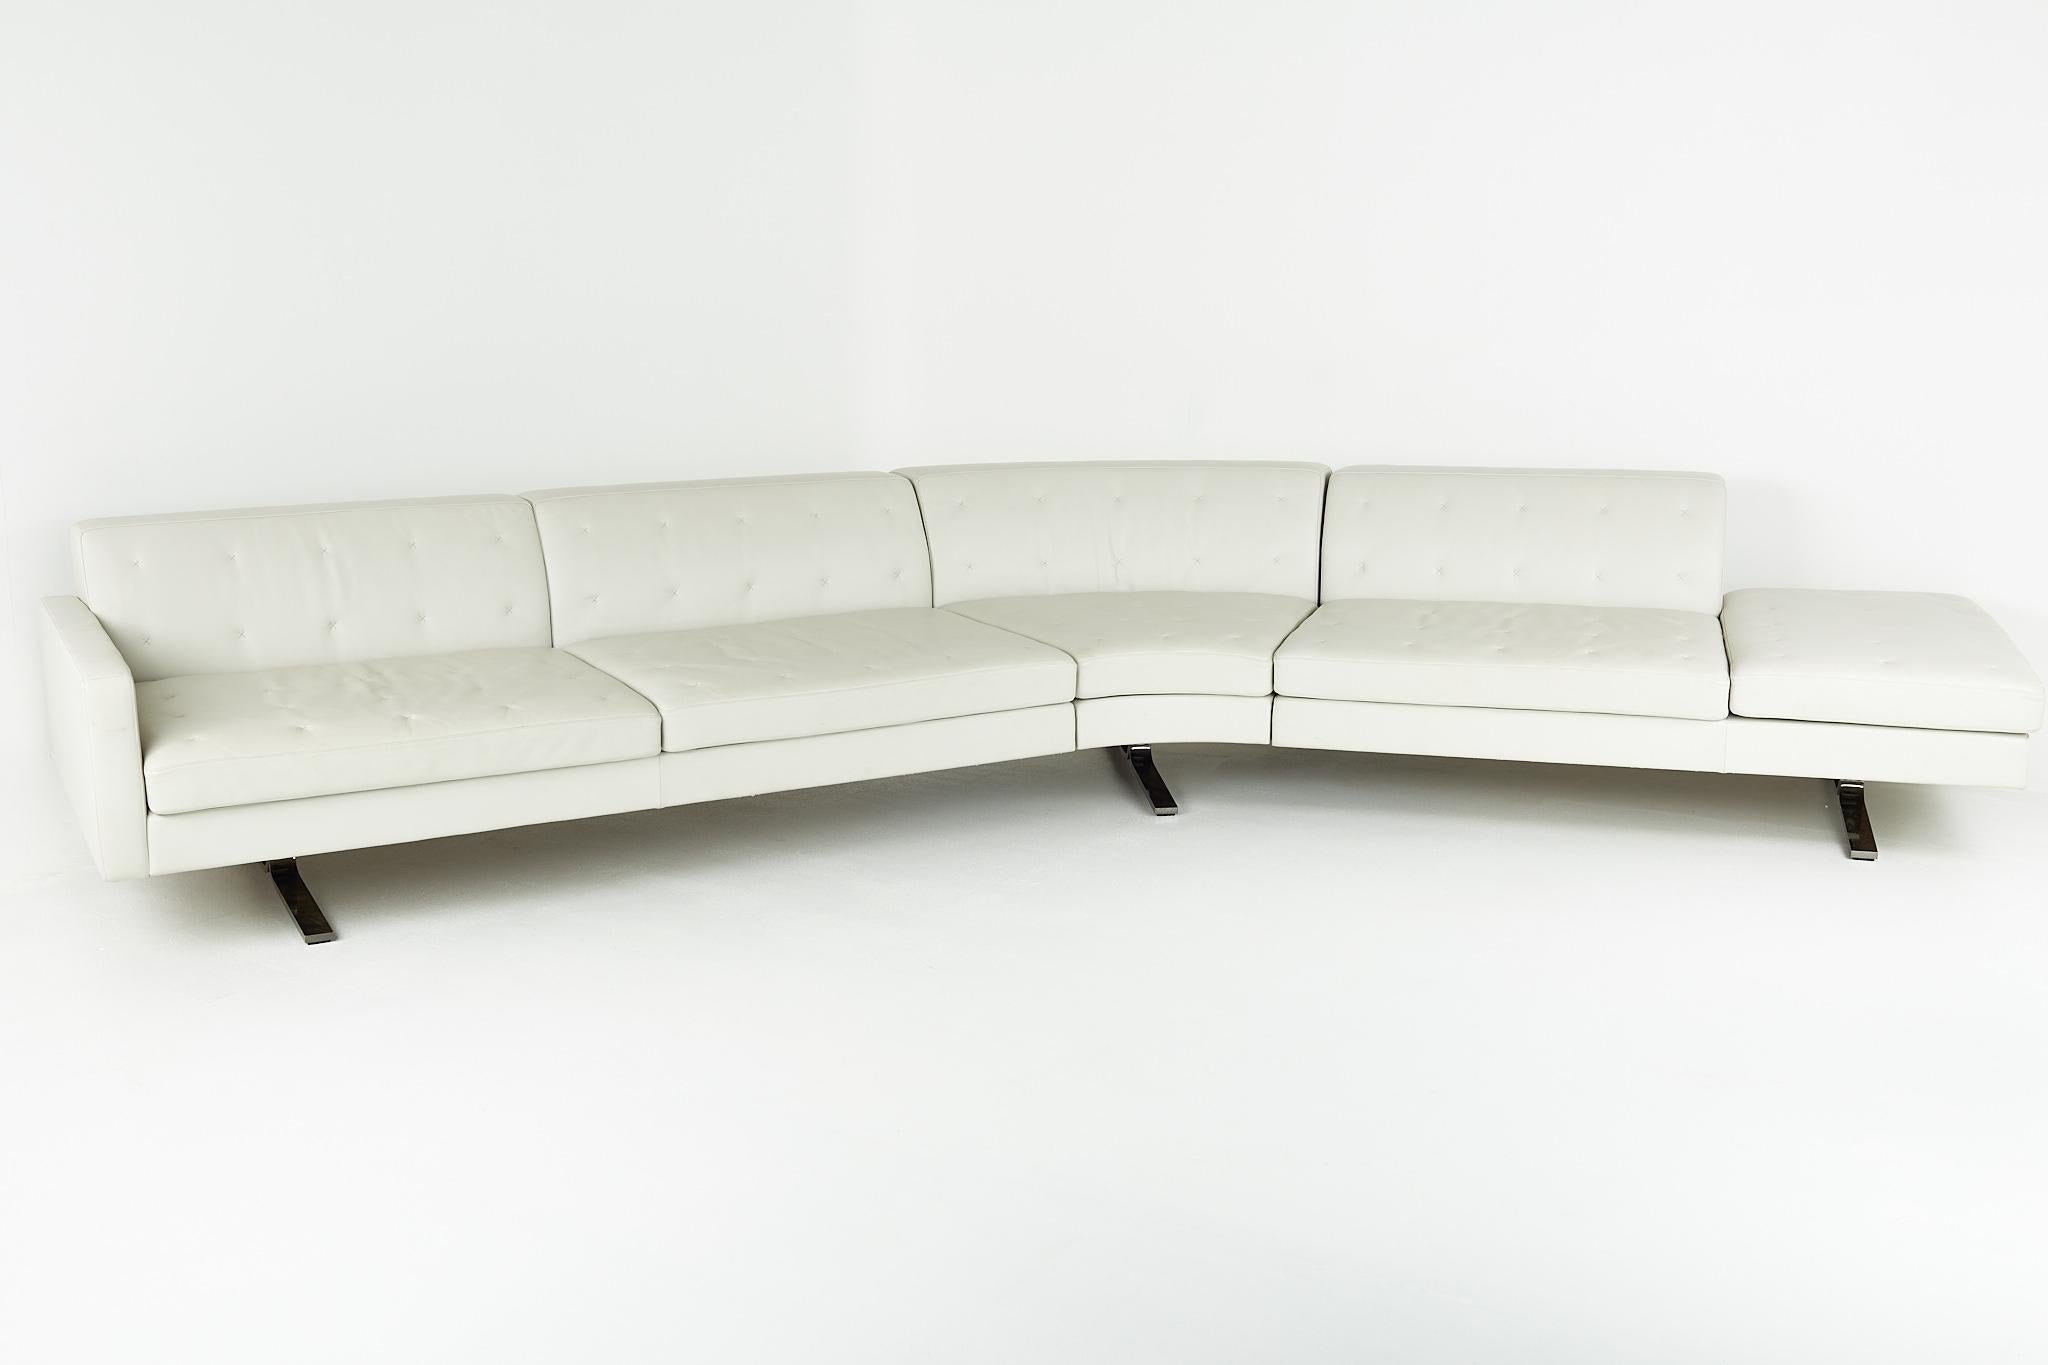 Poltrona Frau Kennedee Mid Century Italian Leather Sectional Sofa

This sectional measures: 168 wide x 37.5 deep x 26.5 inches high, with a seat height of 15 and arm height of 20.5 inches

?All pieces of furniture can be had in what we call restored